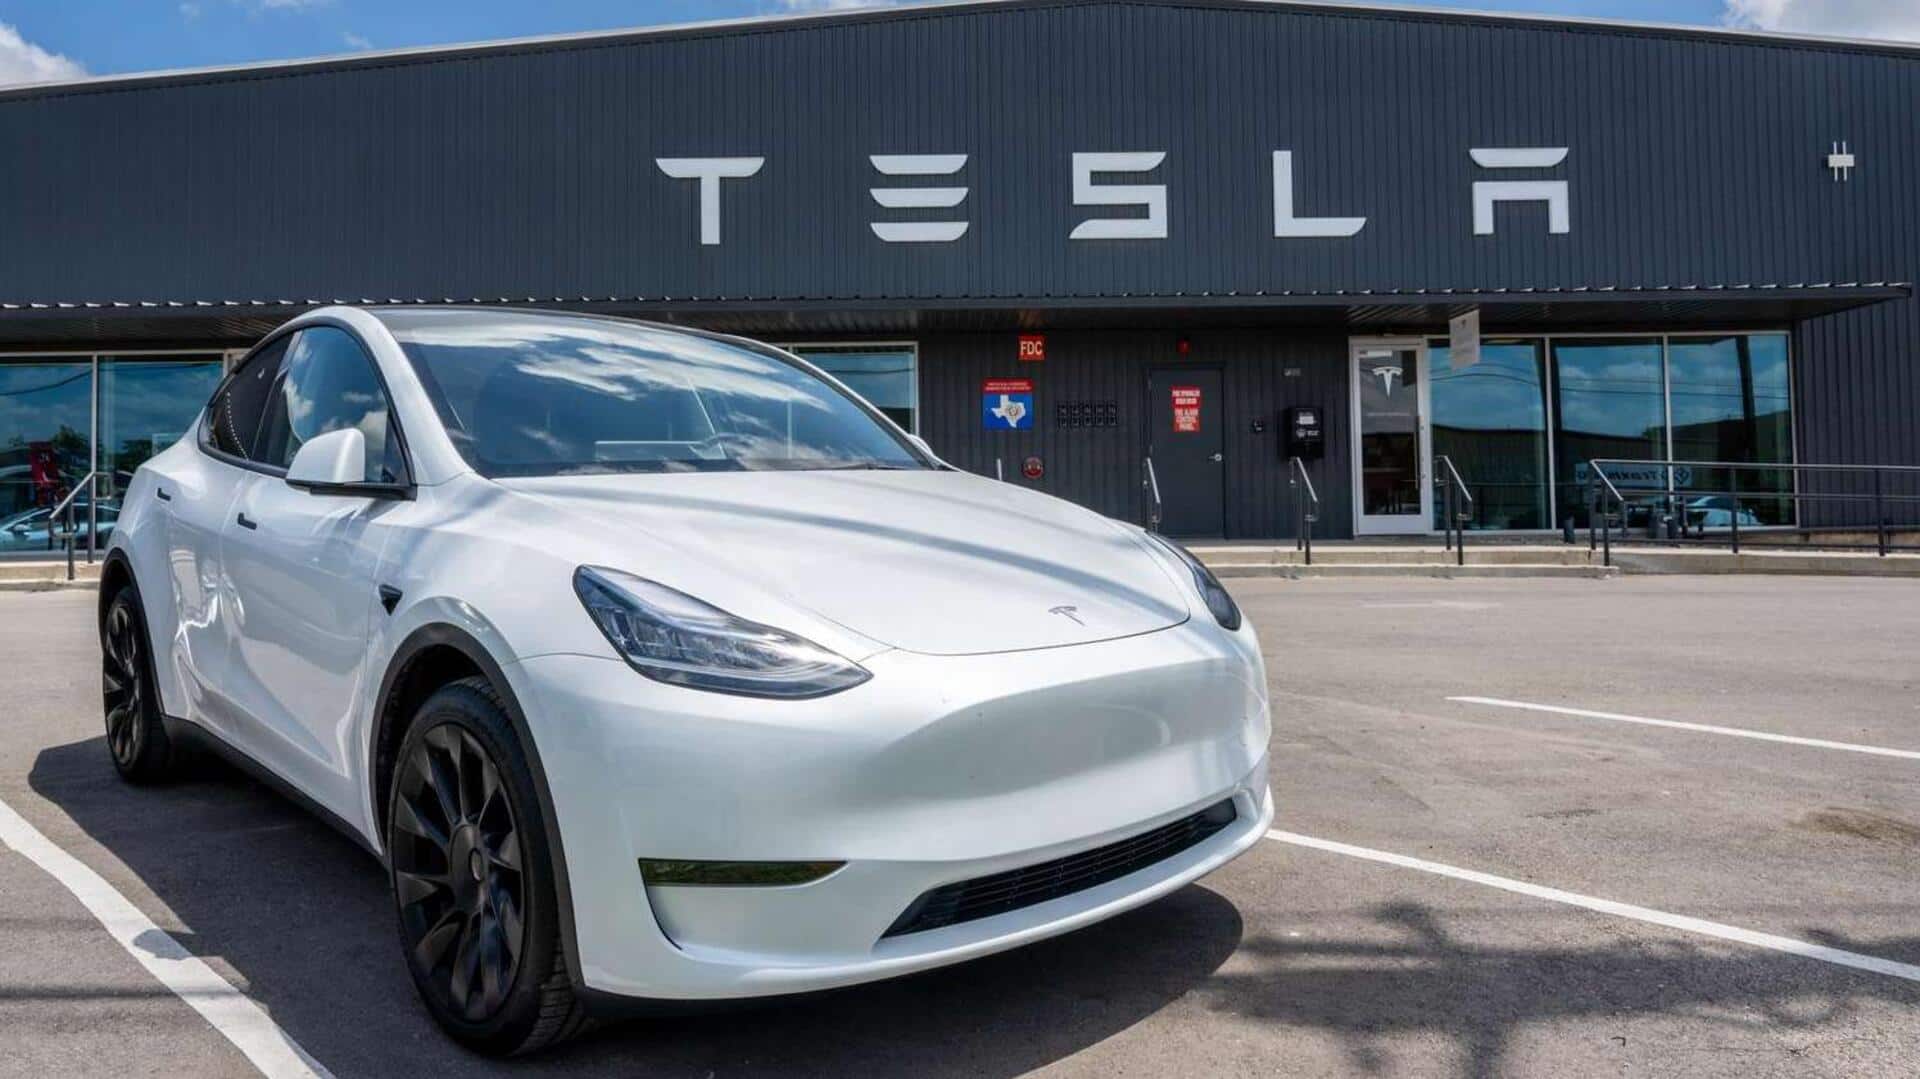 Tesla in talks to enter India with whopping $30B investment